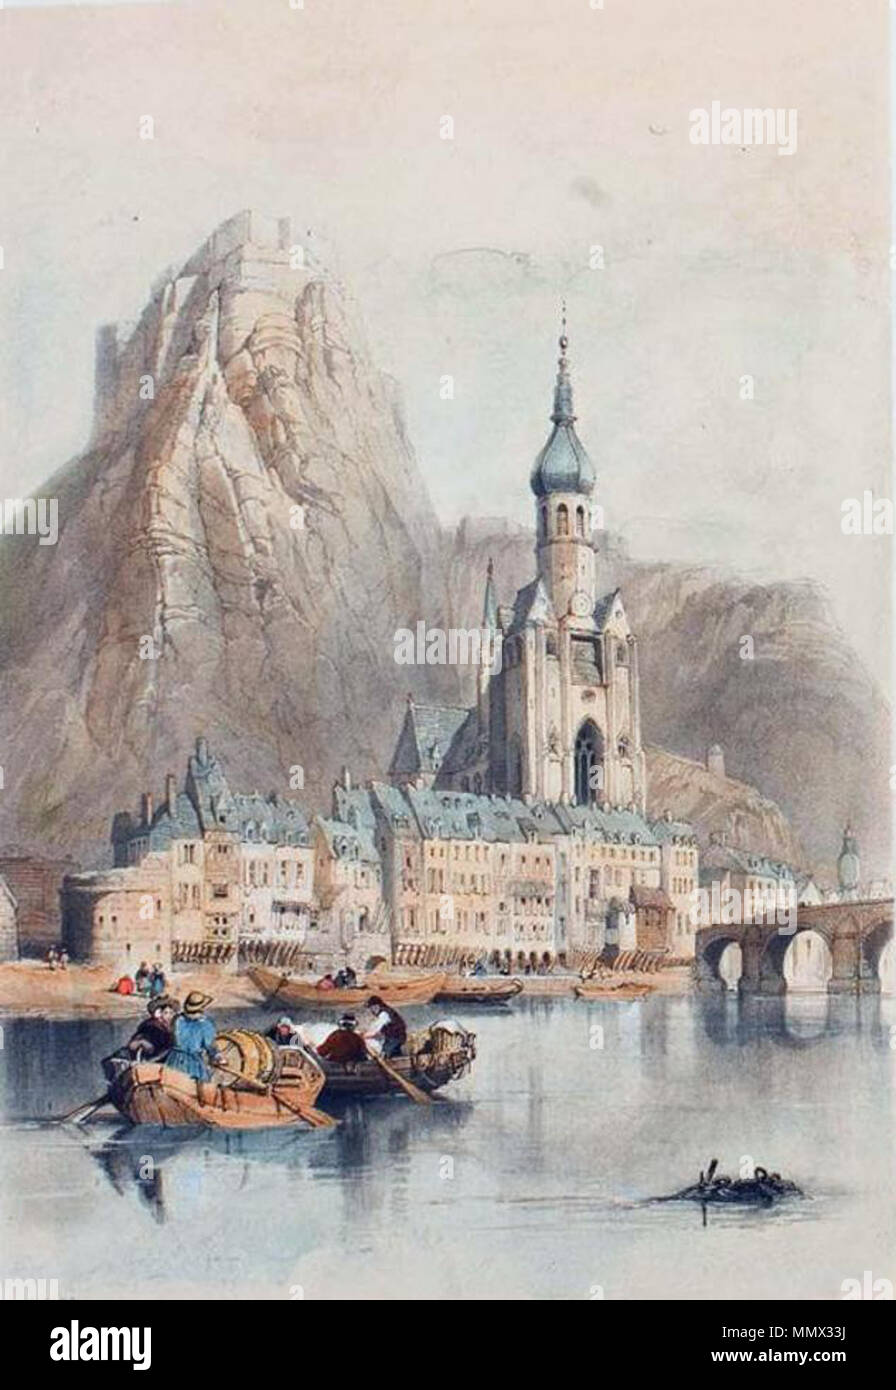 . English: Dinant on the Meuse Deutsch: Dinant an der Maas Français : Dinant sur la Meuse  . 1838.   Clarkson Frederick Stanfield  (1793–1867)     Alternative names William Clarkson Stanfield  Description British painter  Date of birth/death 3 December 1793 18 May 1867  Location of birth/death Sunderland Hampstead  Work location UK  Authority control  : Q1095862 VIAF:?44523948 ISNI:?0000 0001 1471 5101 ULAN:?500012527 LCCN:?n50023998 NLA:?36558207 WorldCat Dinant on the Meuse Stock Photo